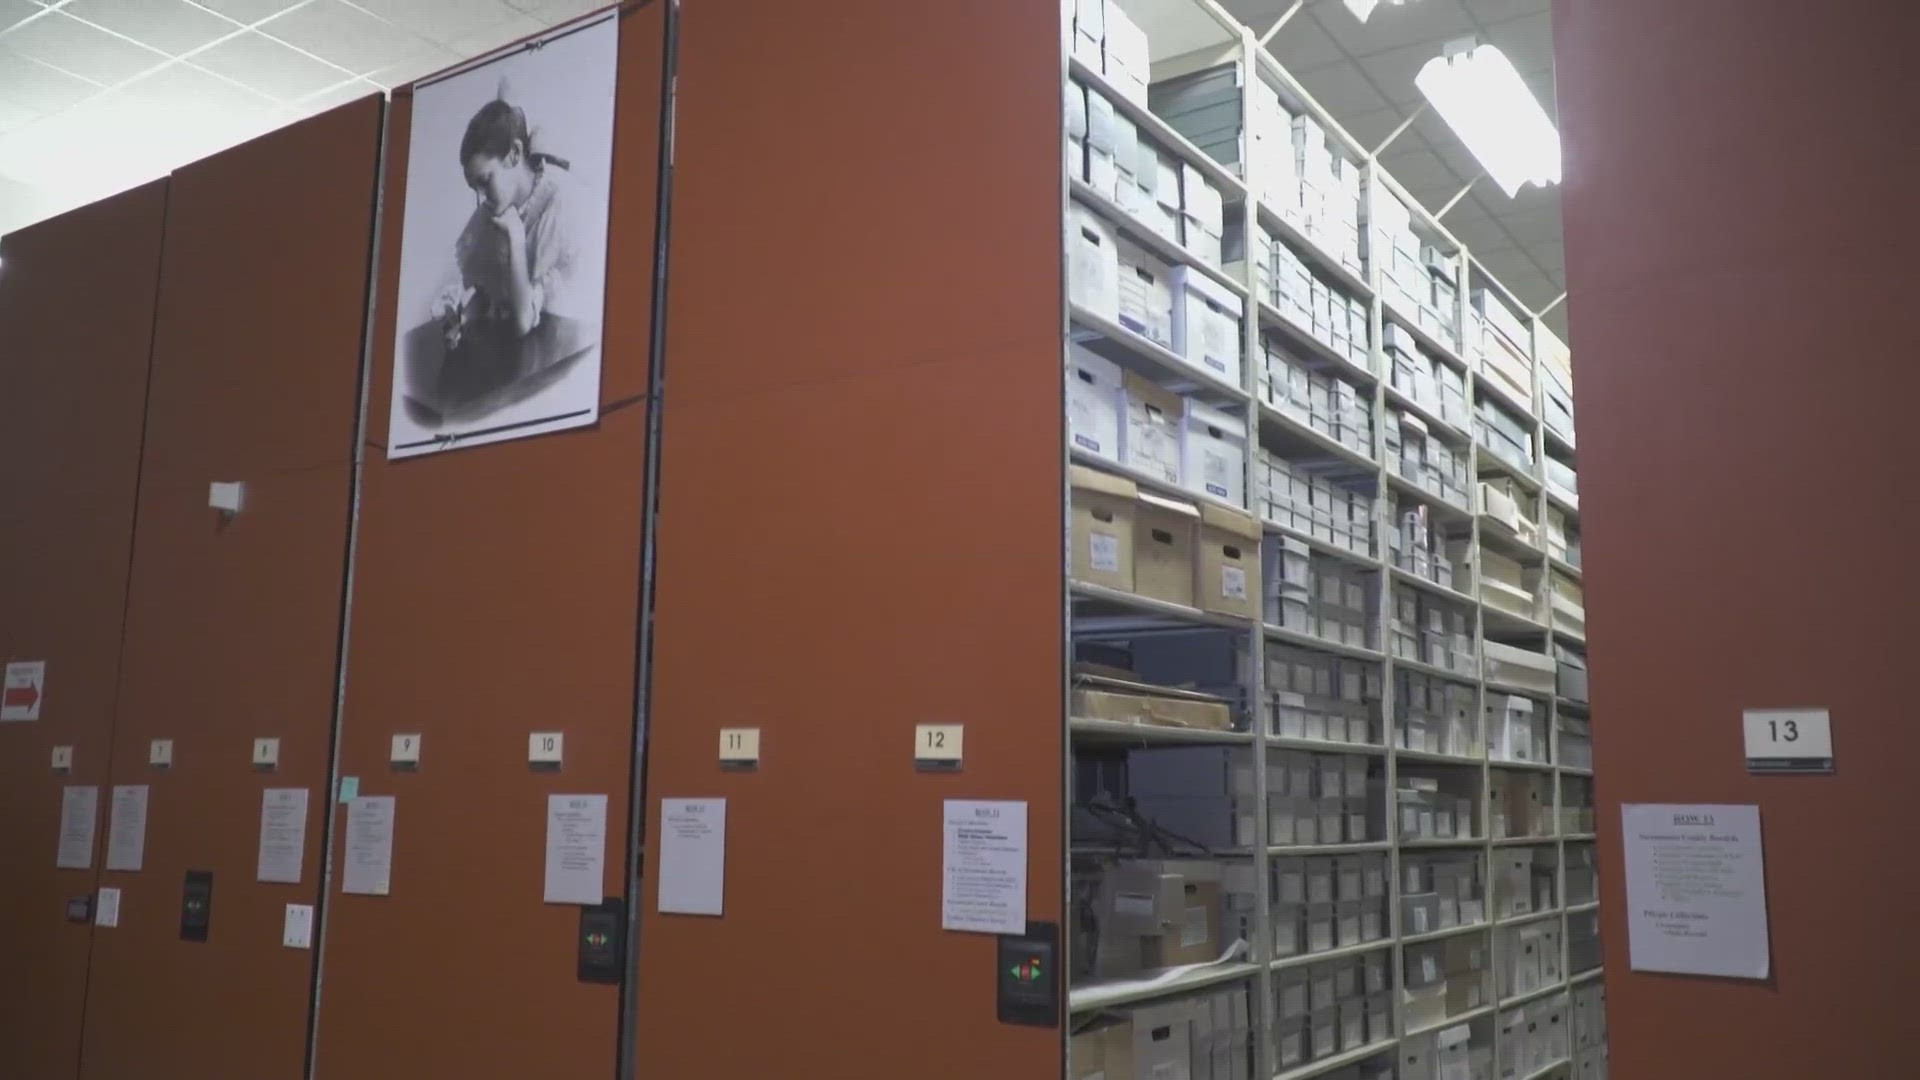 Family History Week | Center for Sacramento History helps uncover family treasures